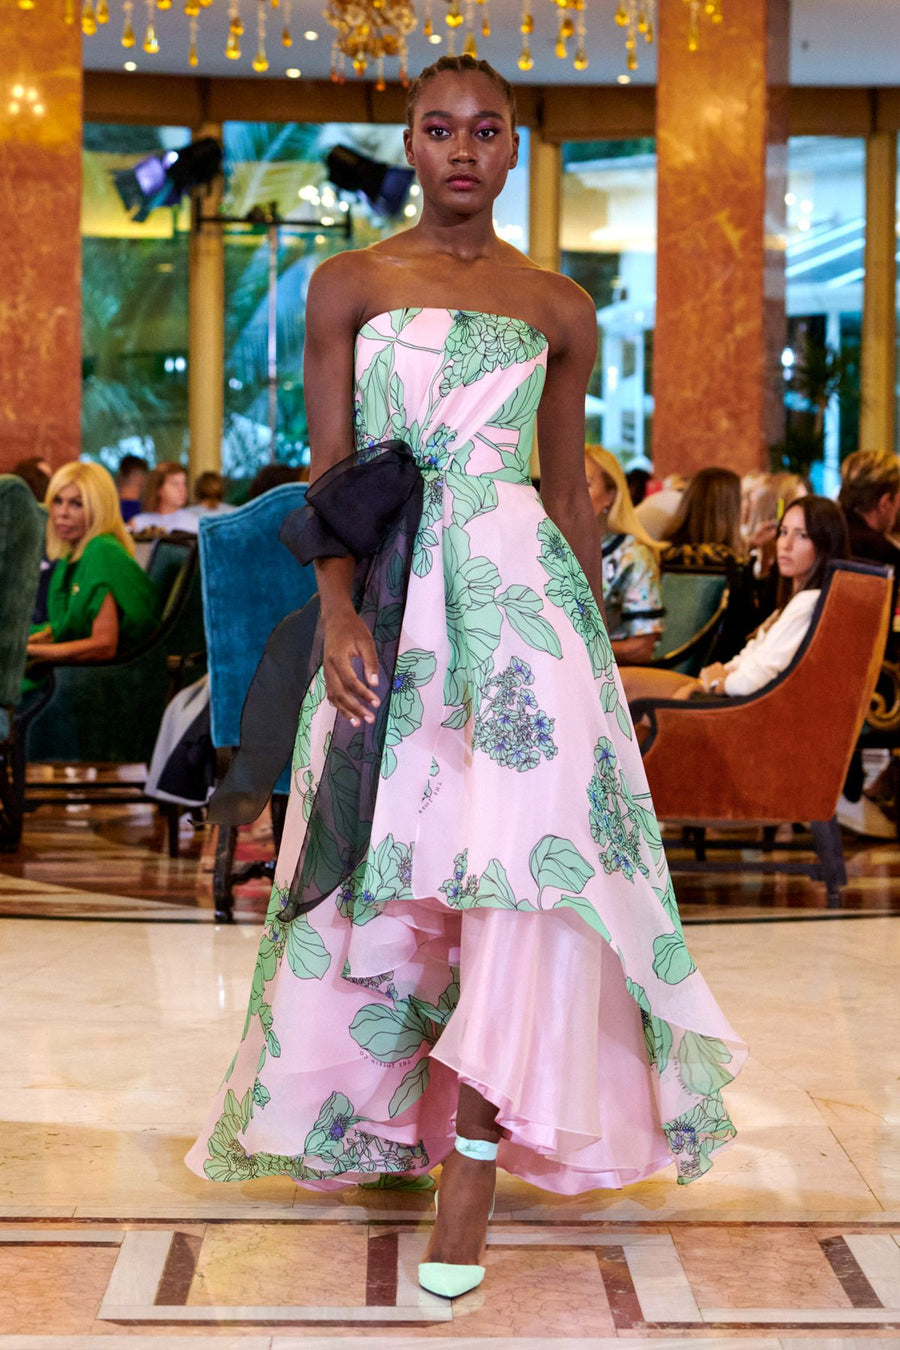 THE 2ND SKIN ORGANZA STRAPLESS DRESS IN MINT